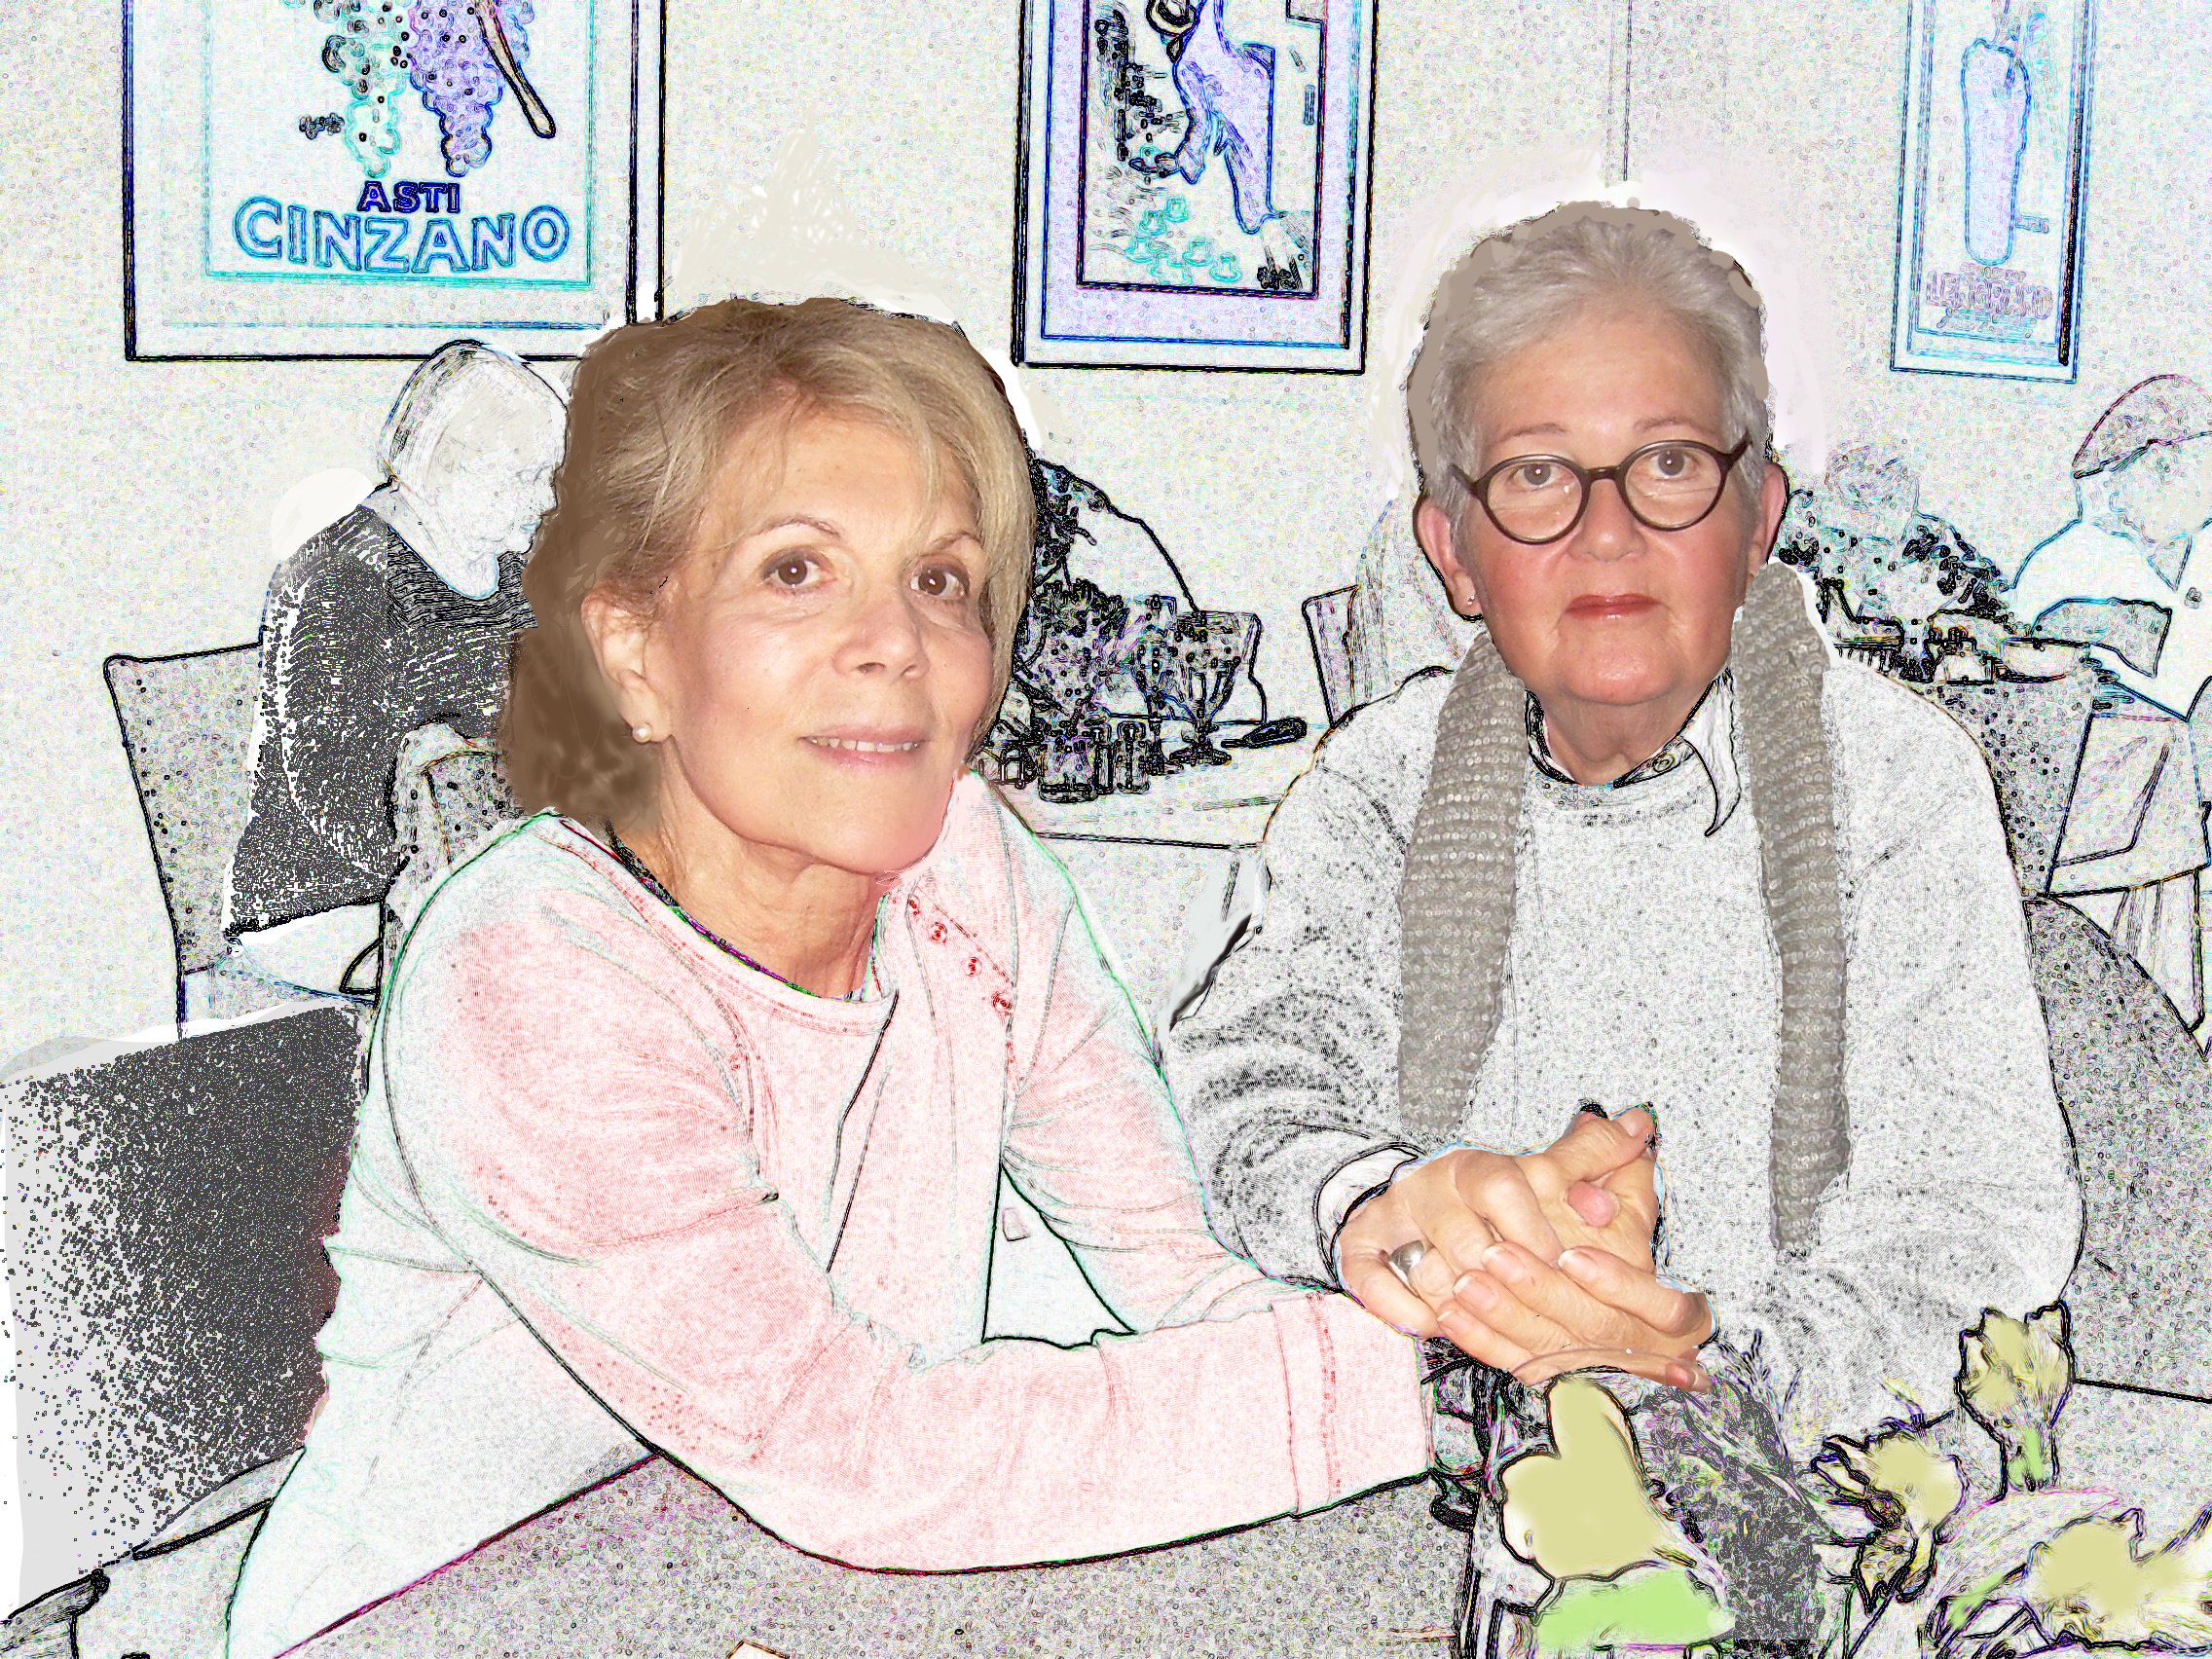   Janie Wolberg, actress , and Barbrara Leif, artist.at lunch    